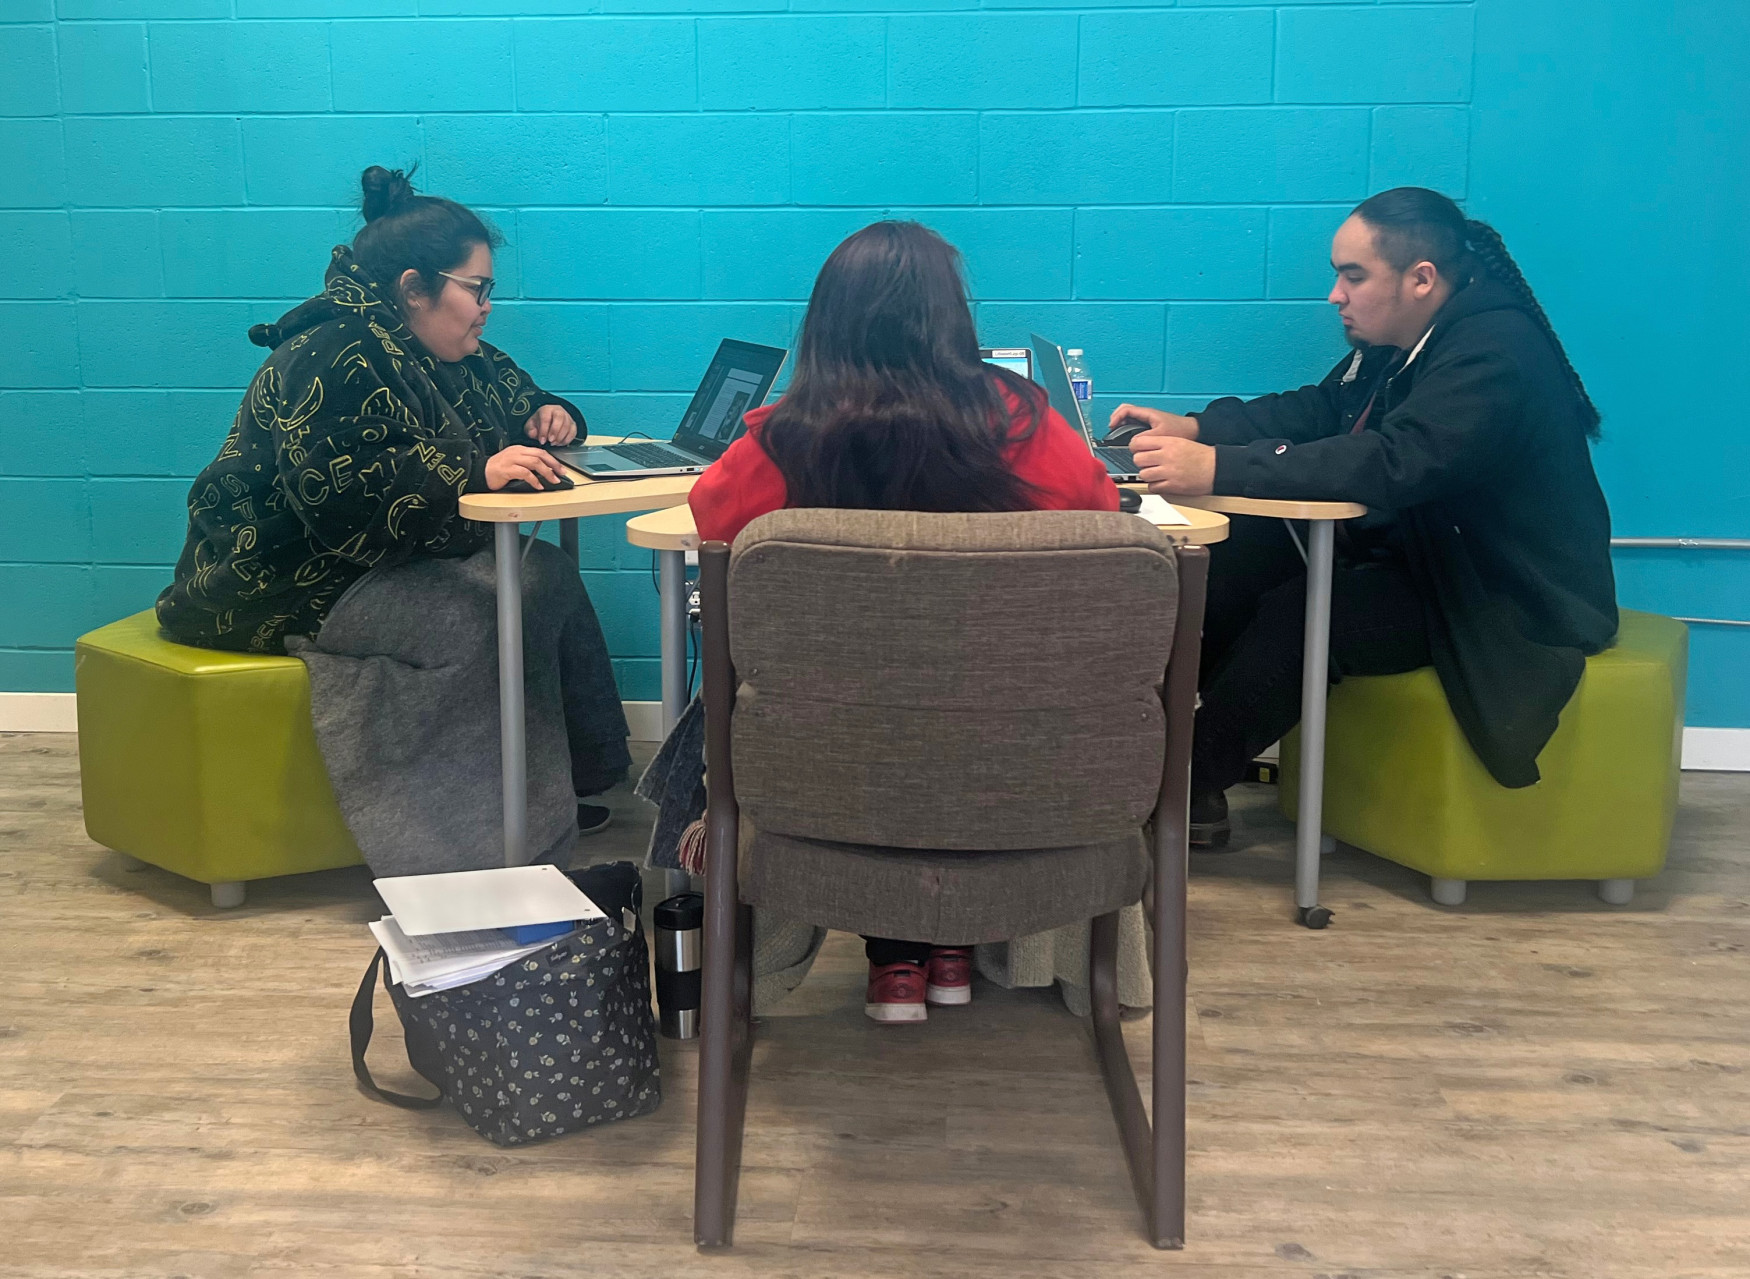 Students using the fresh study space